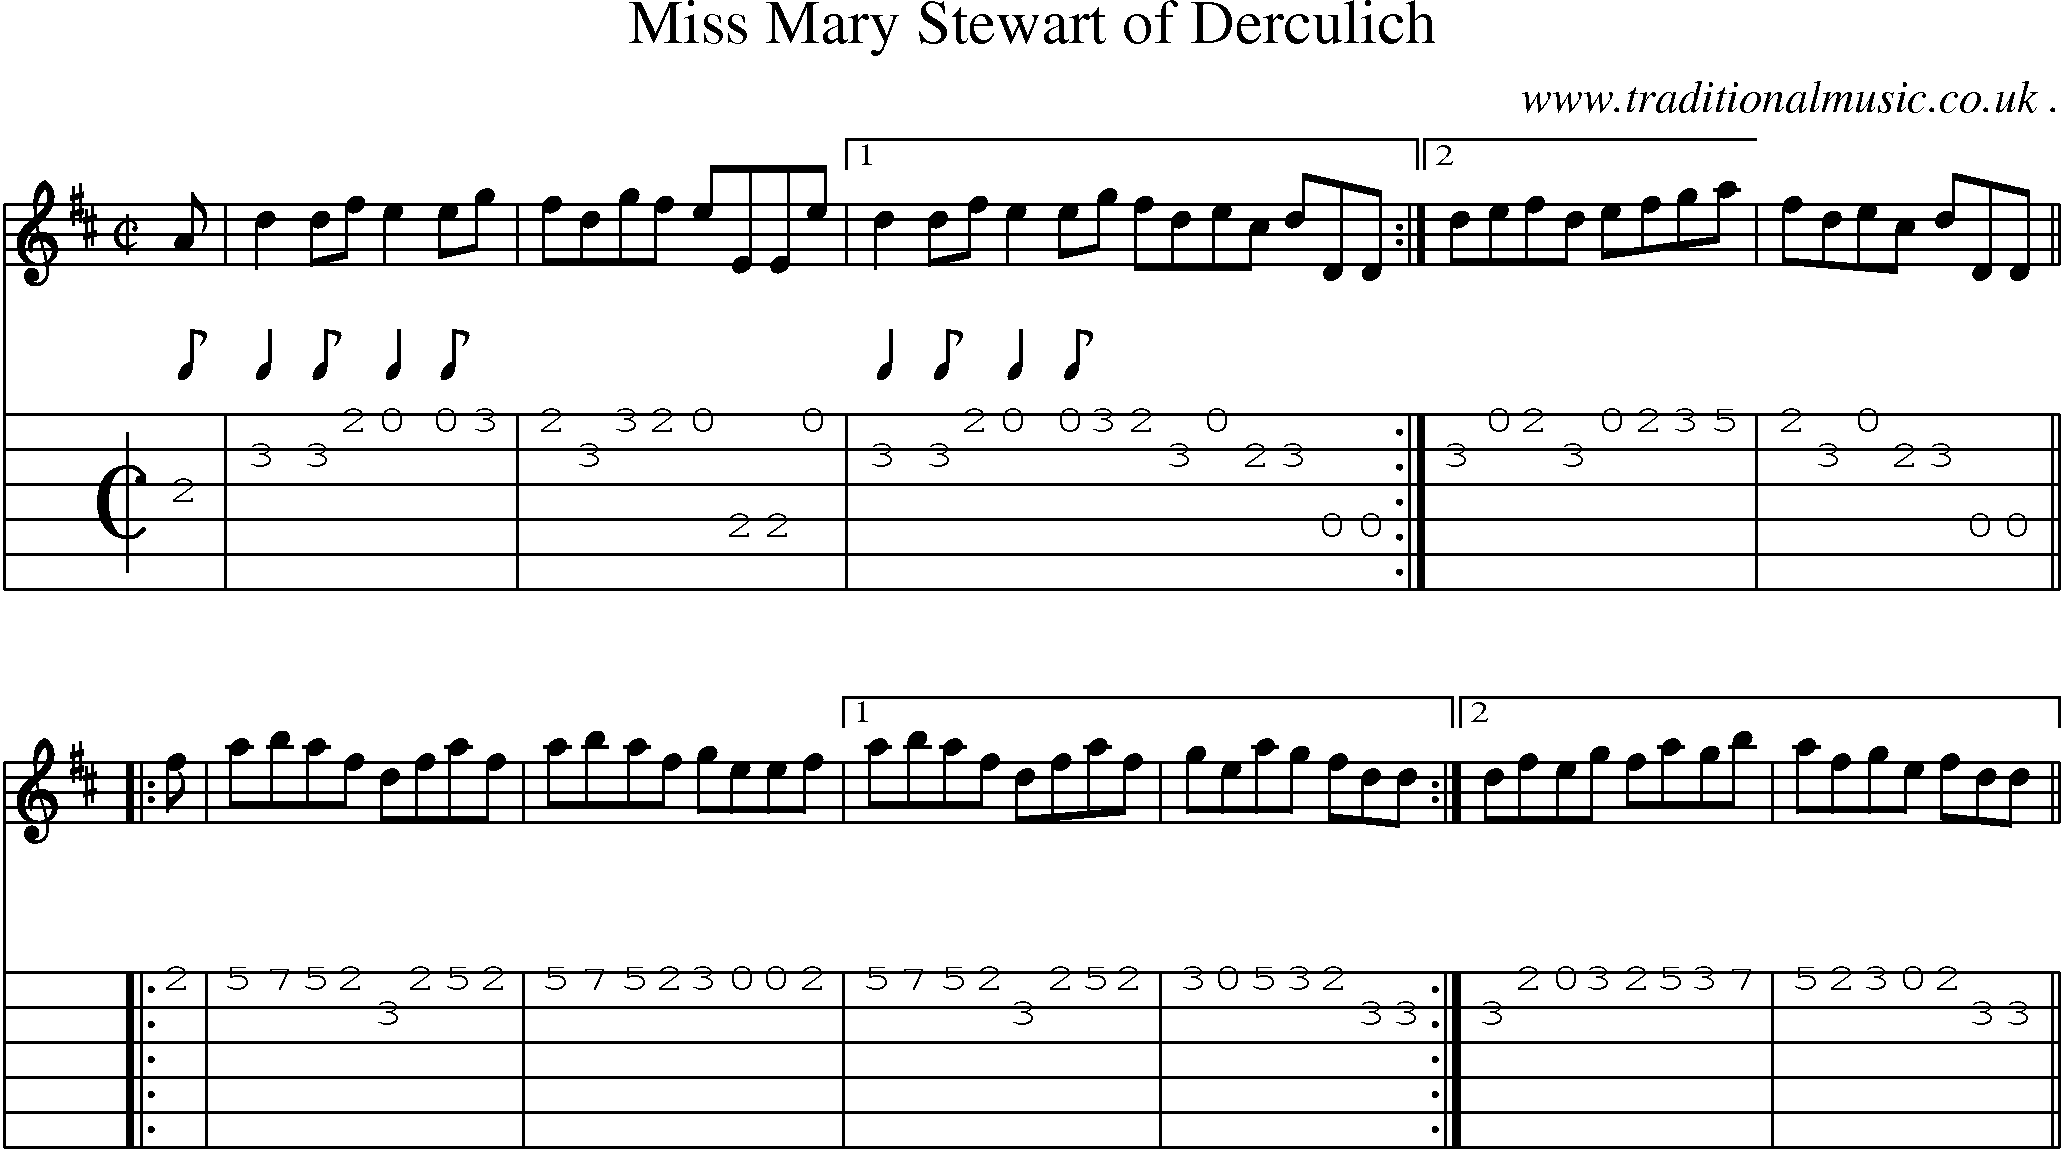 Sheet-music  score, Chords and Guitar Tabs for Miss Mary Stewart Of Derculich